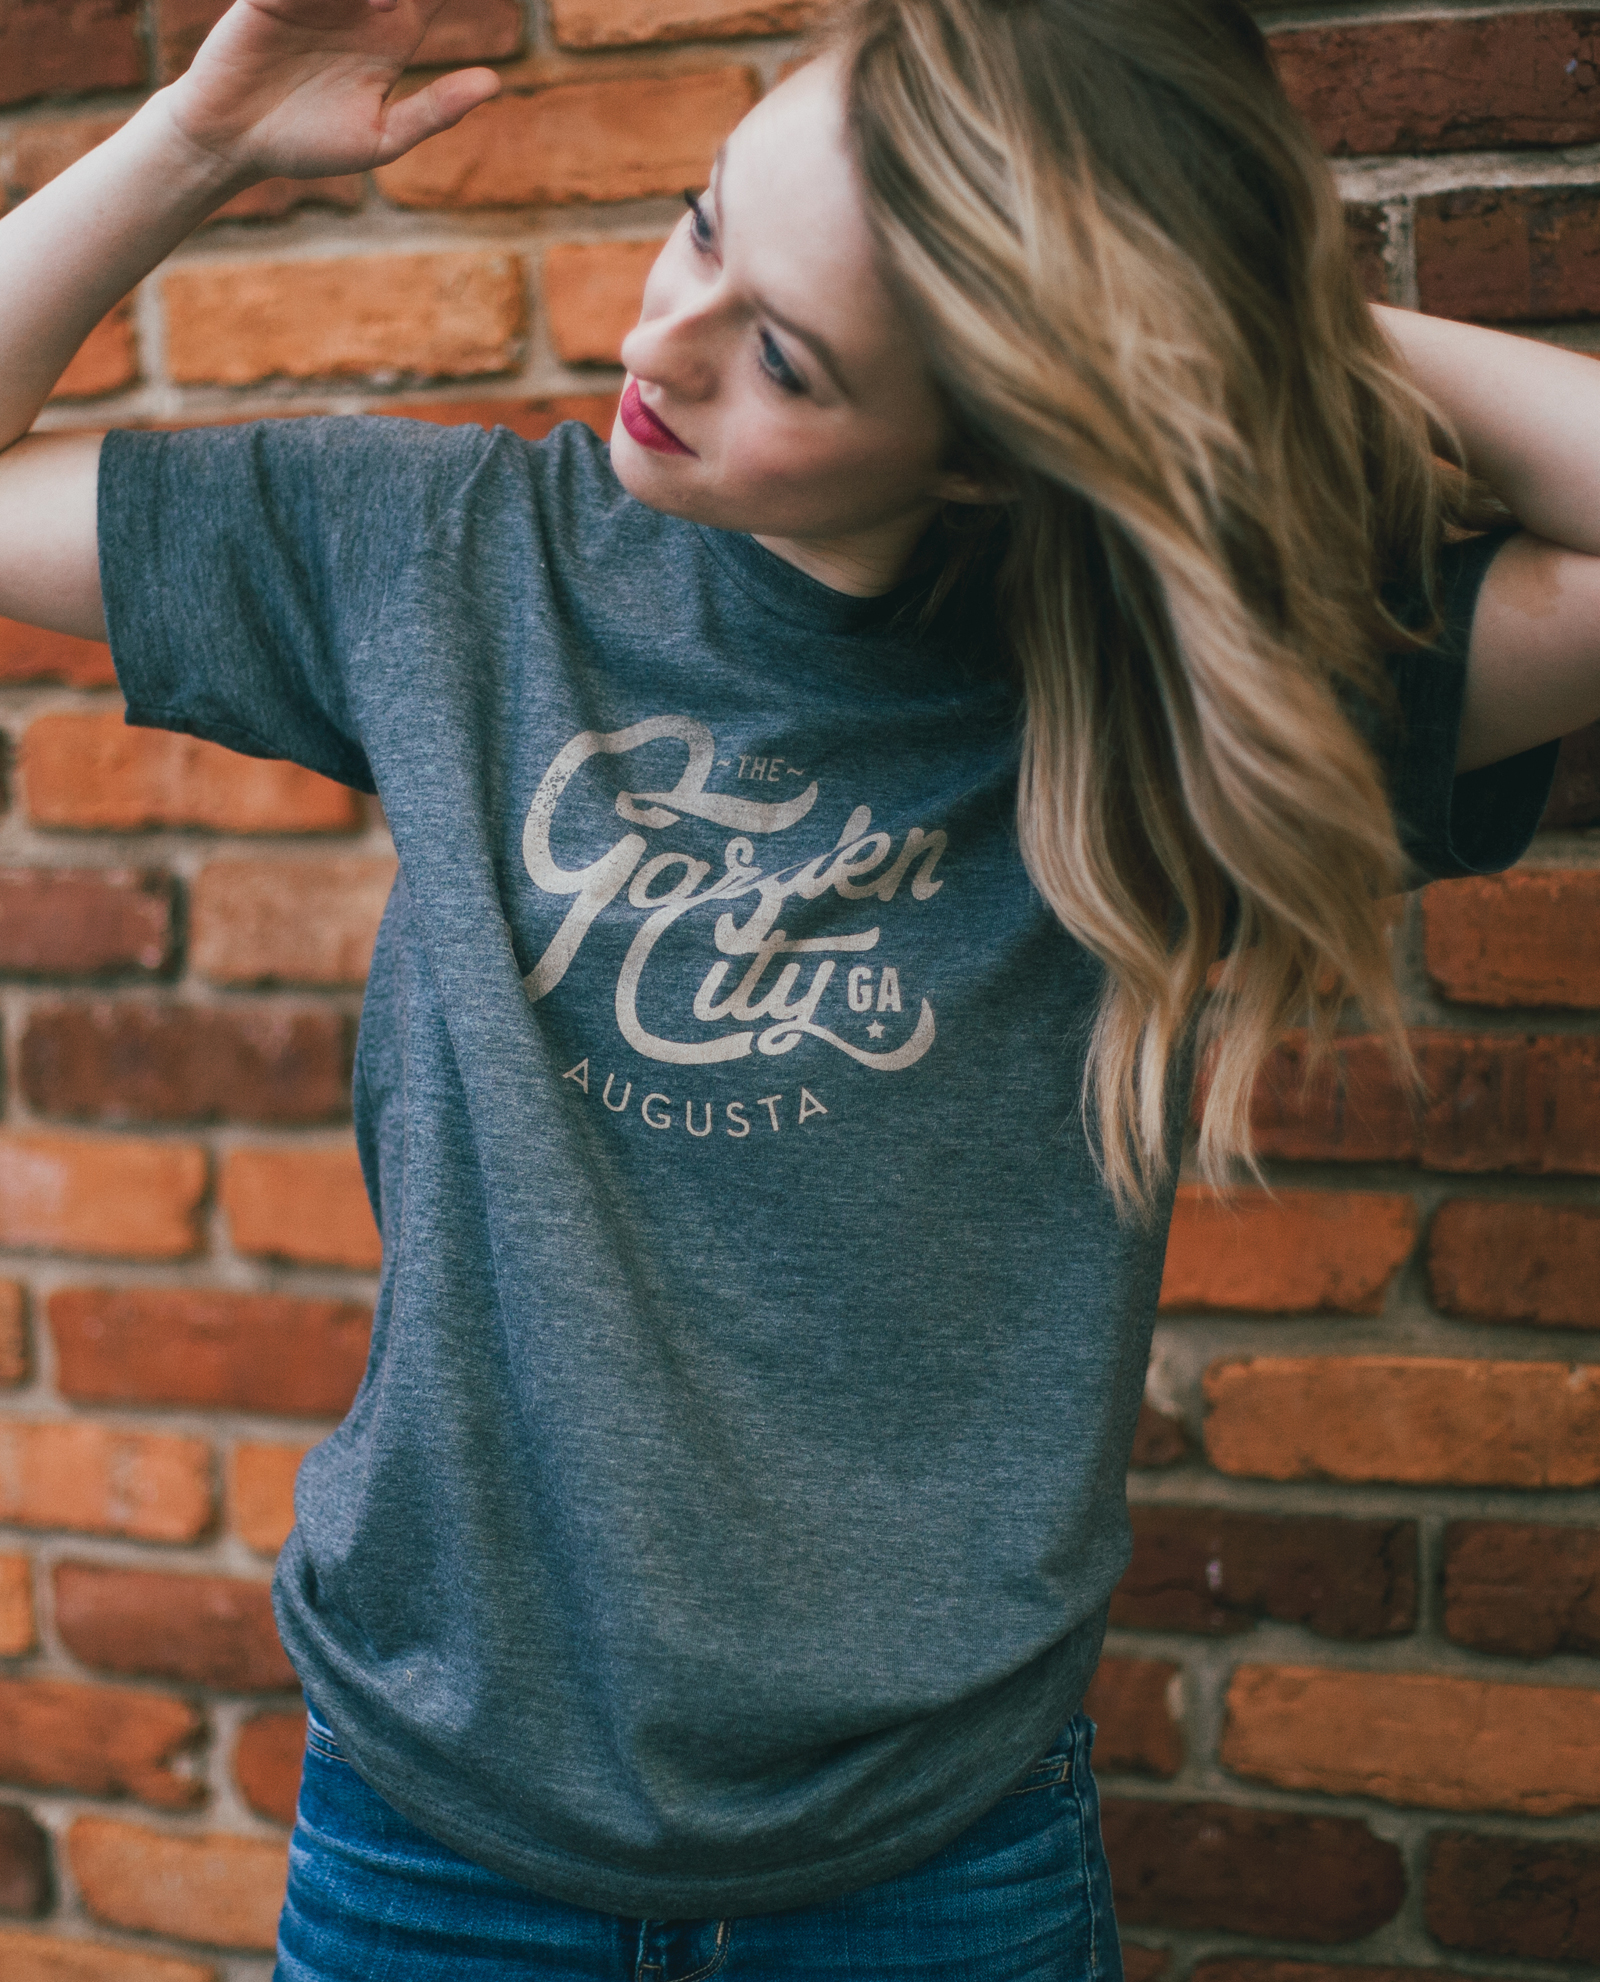 Woman in front of brick wall wearing blue vintage Garden City shirt